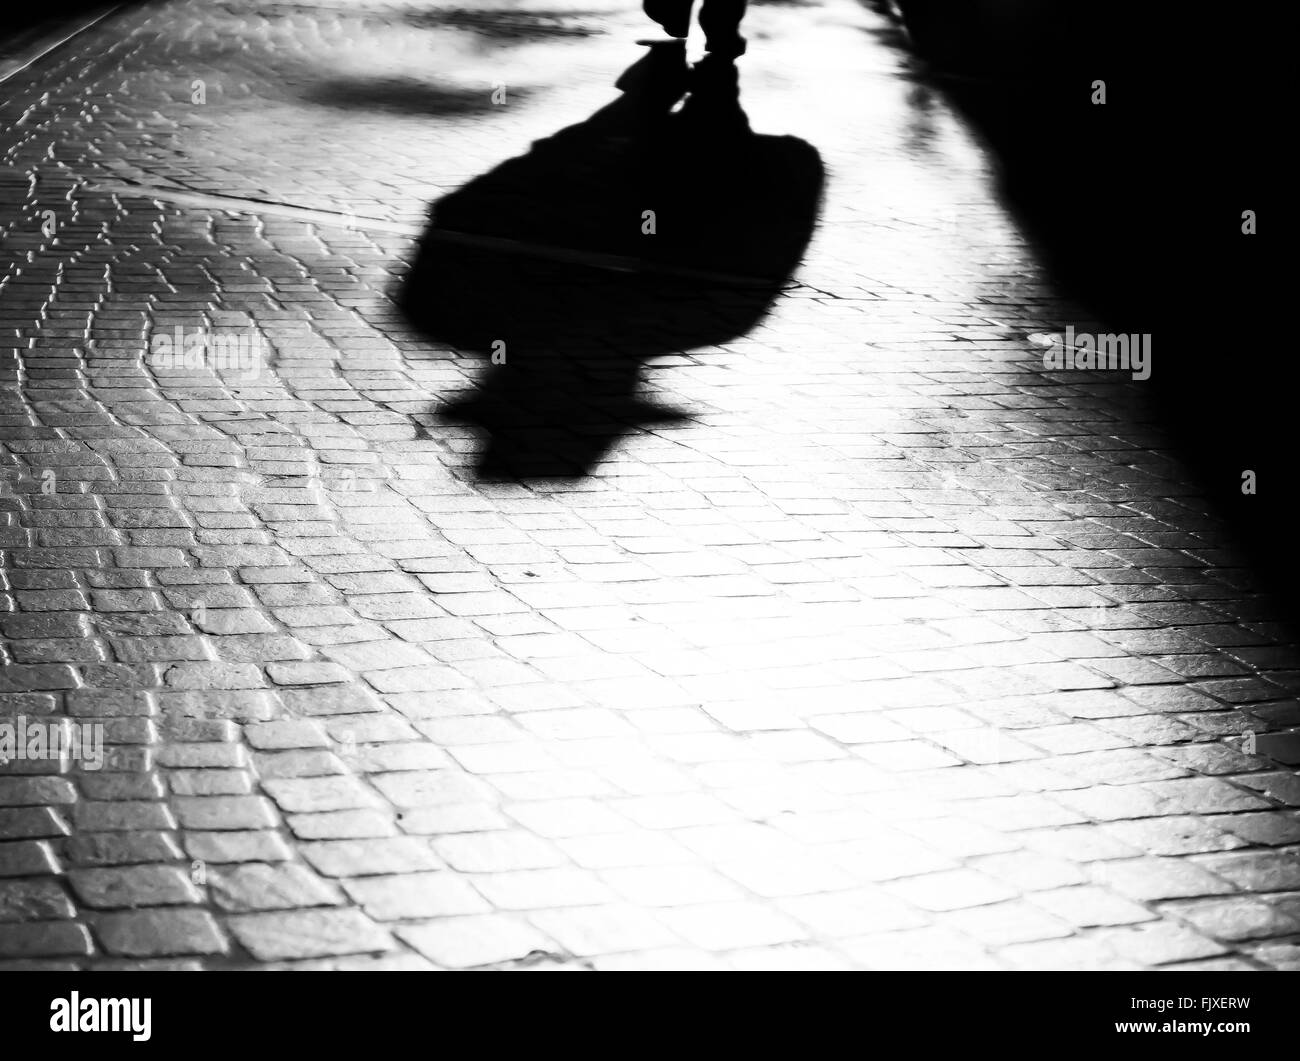 Shadow Of Person On Street Stock Photo